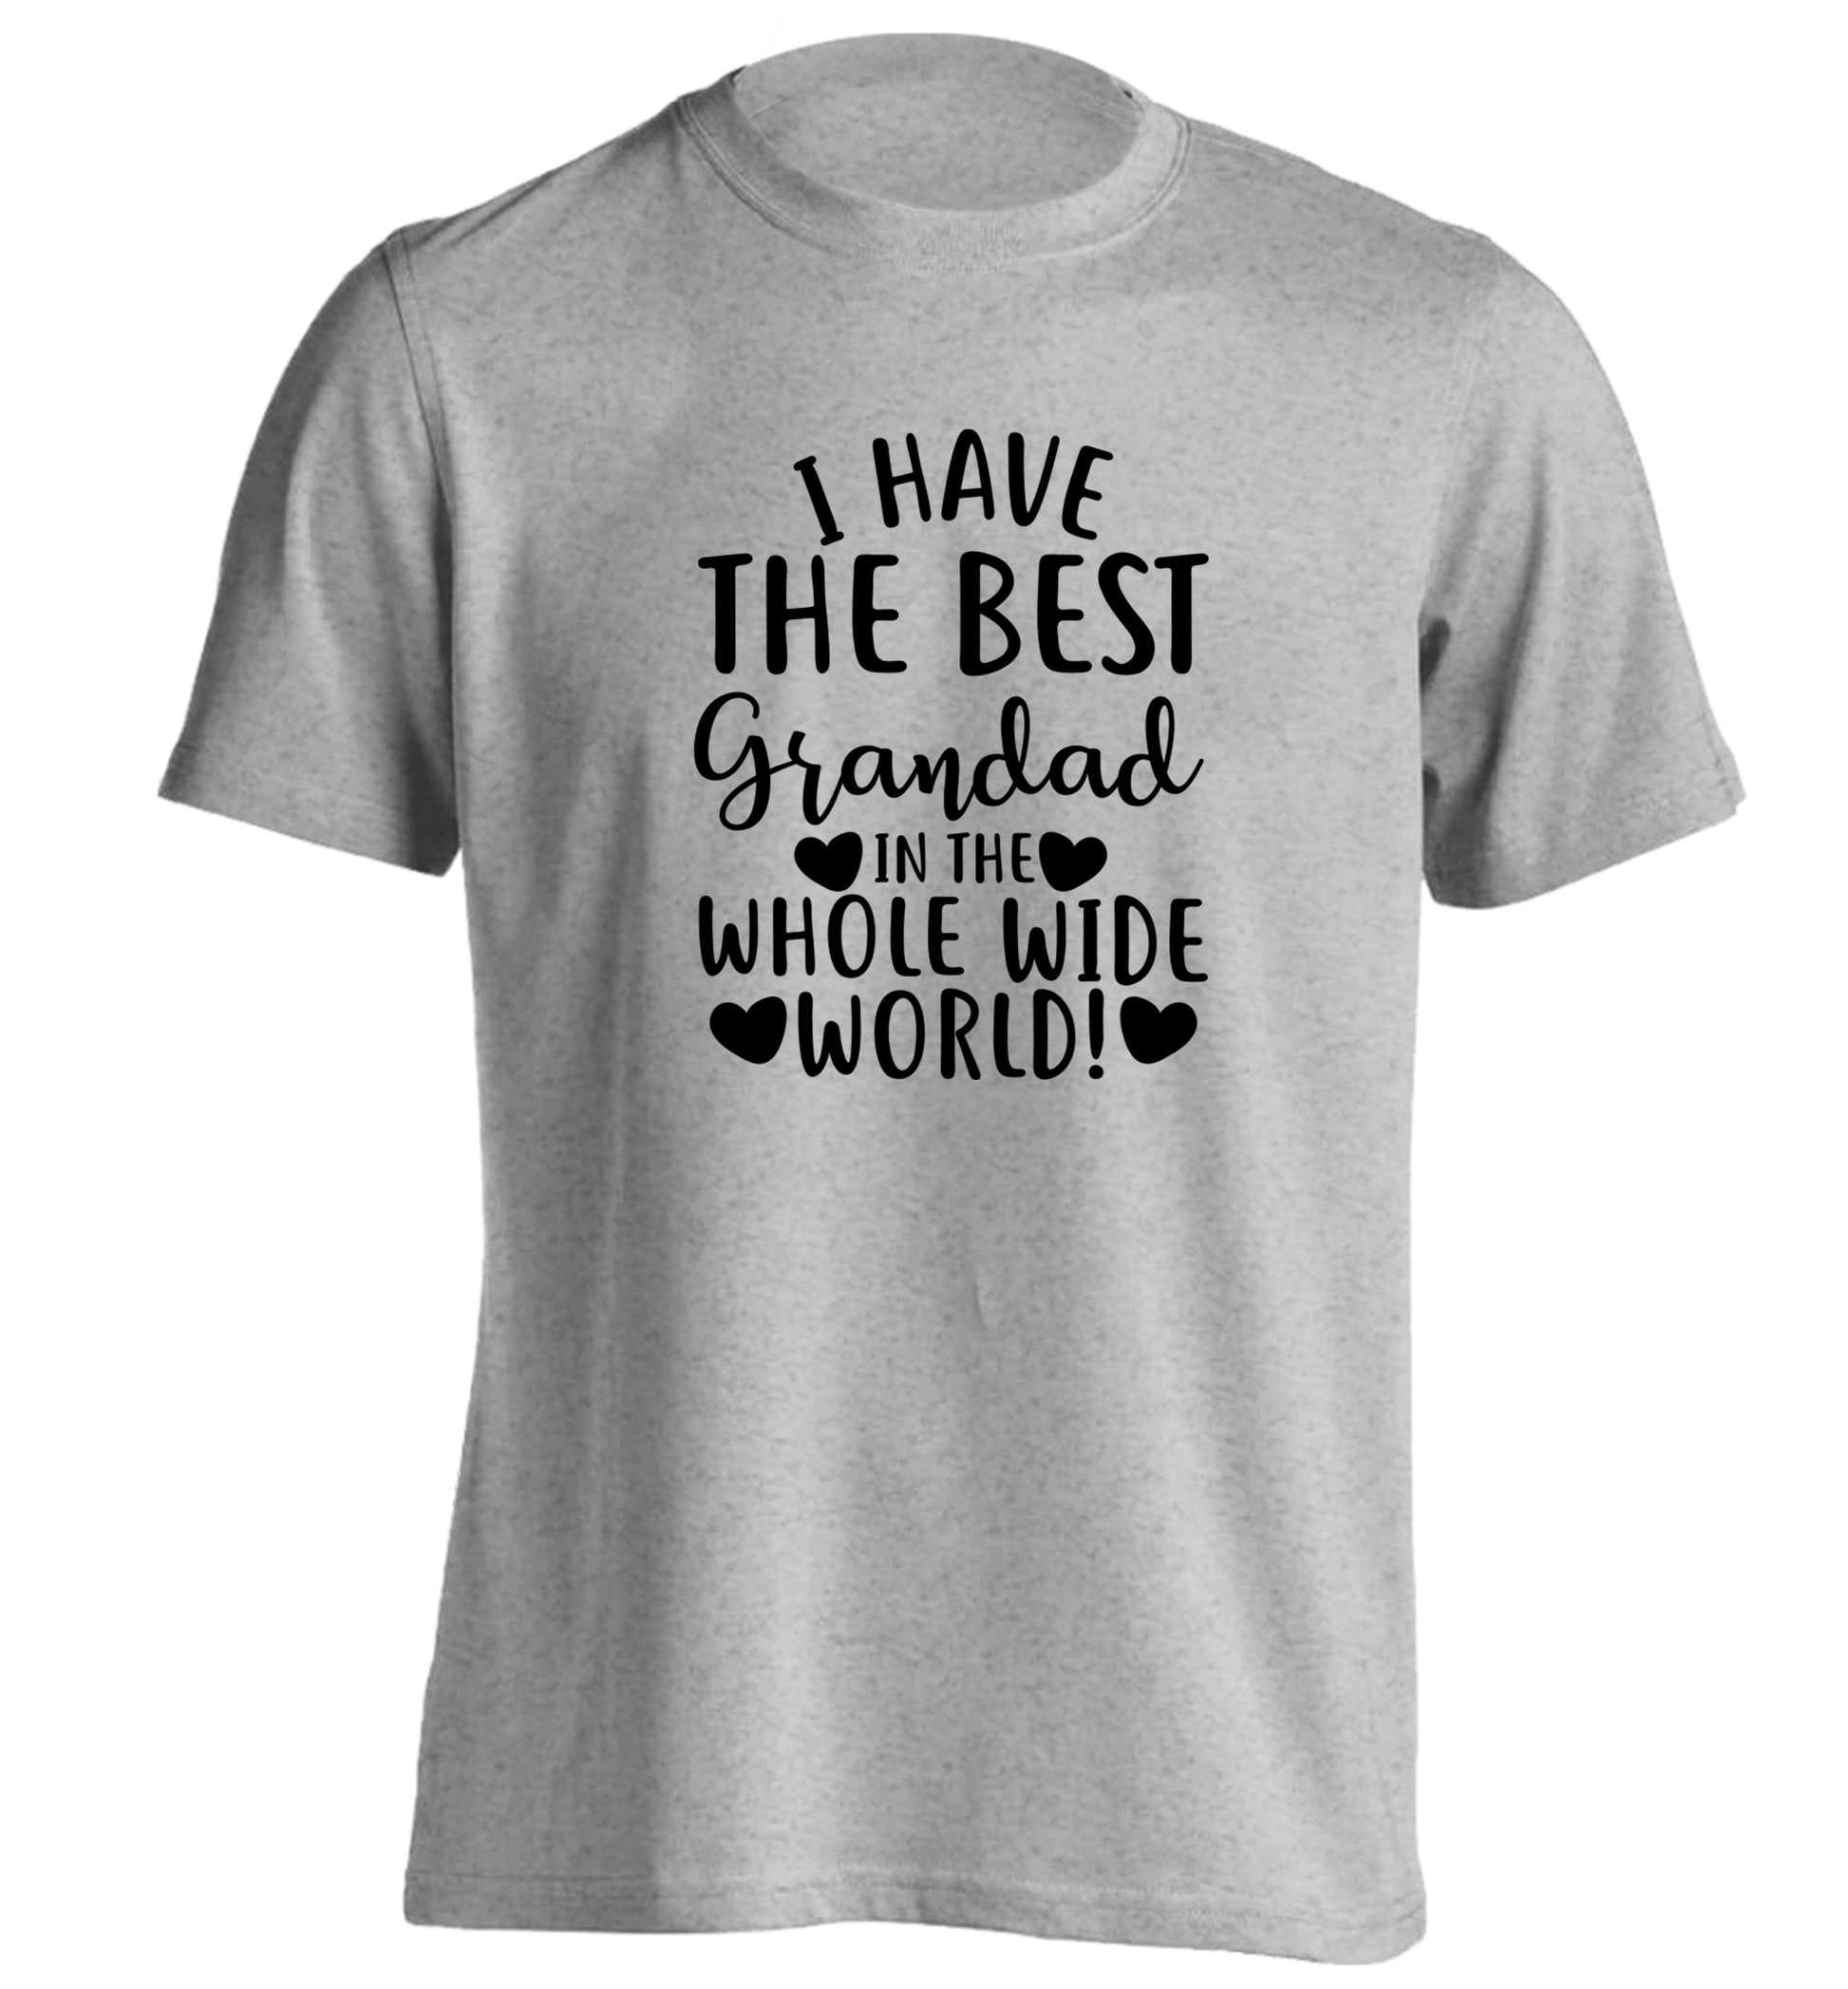 I have the best grandad in the whole wide world! adults unisex grey Tshirt 2XL